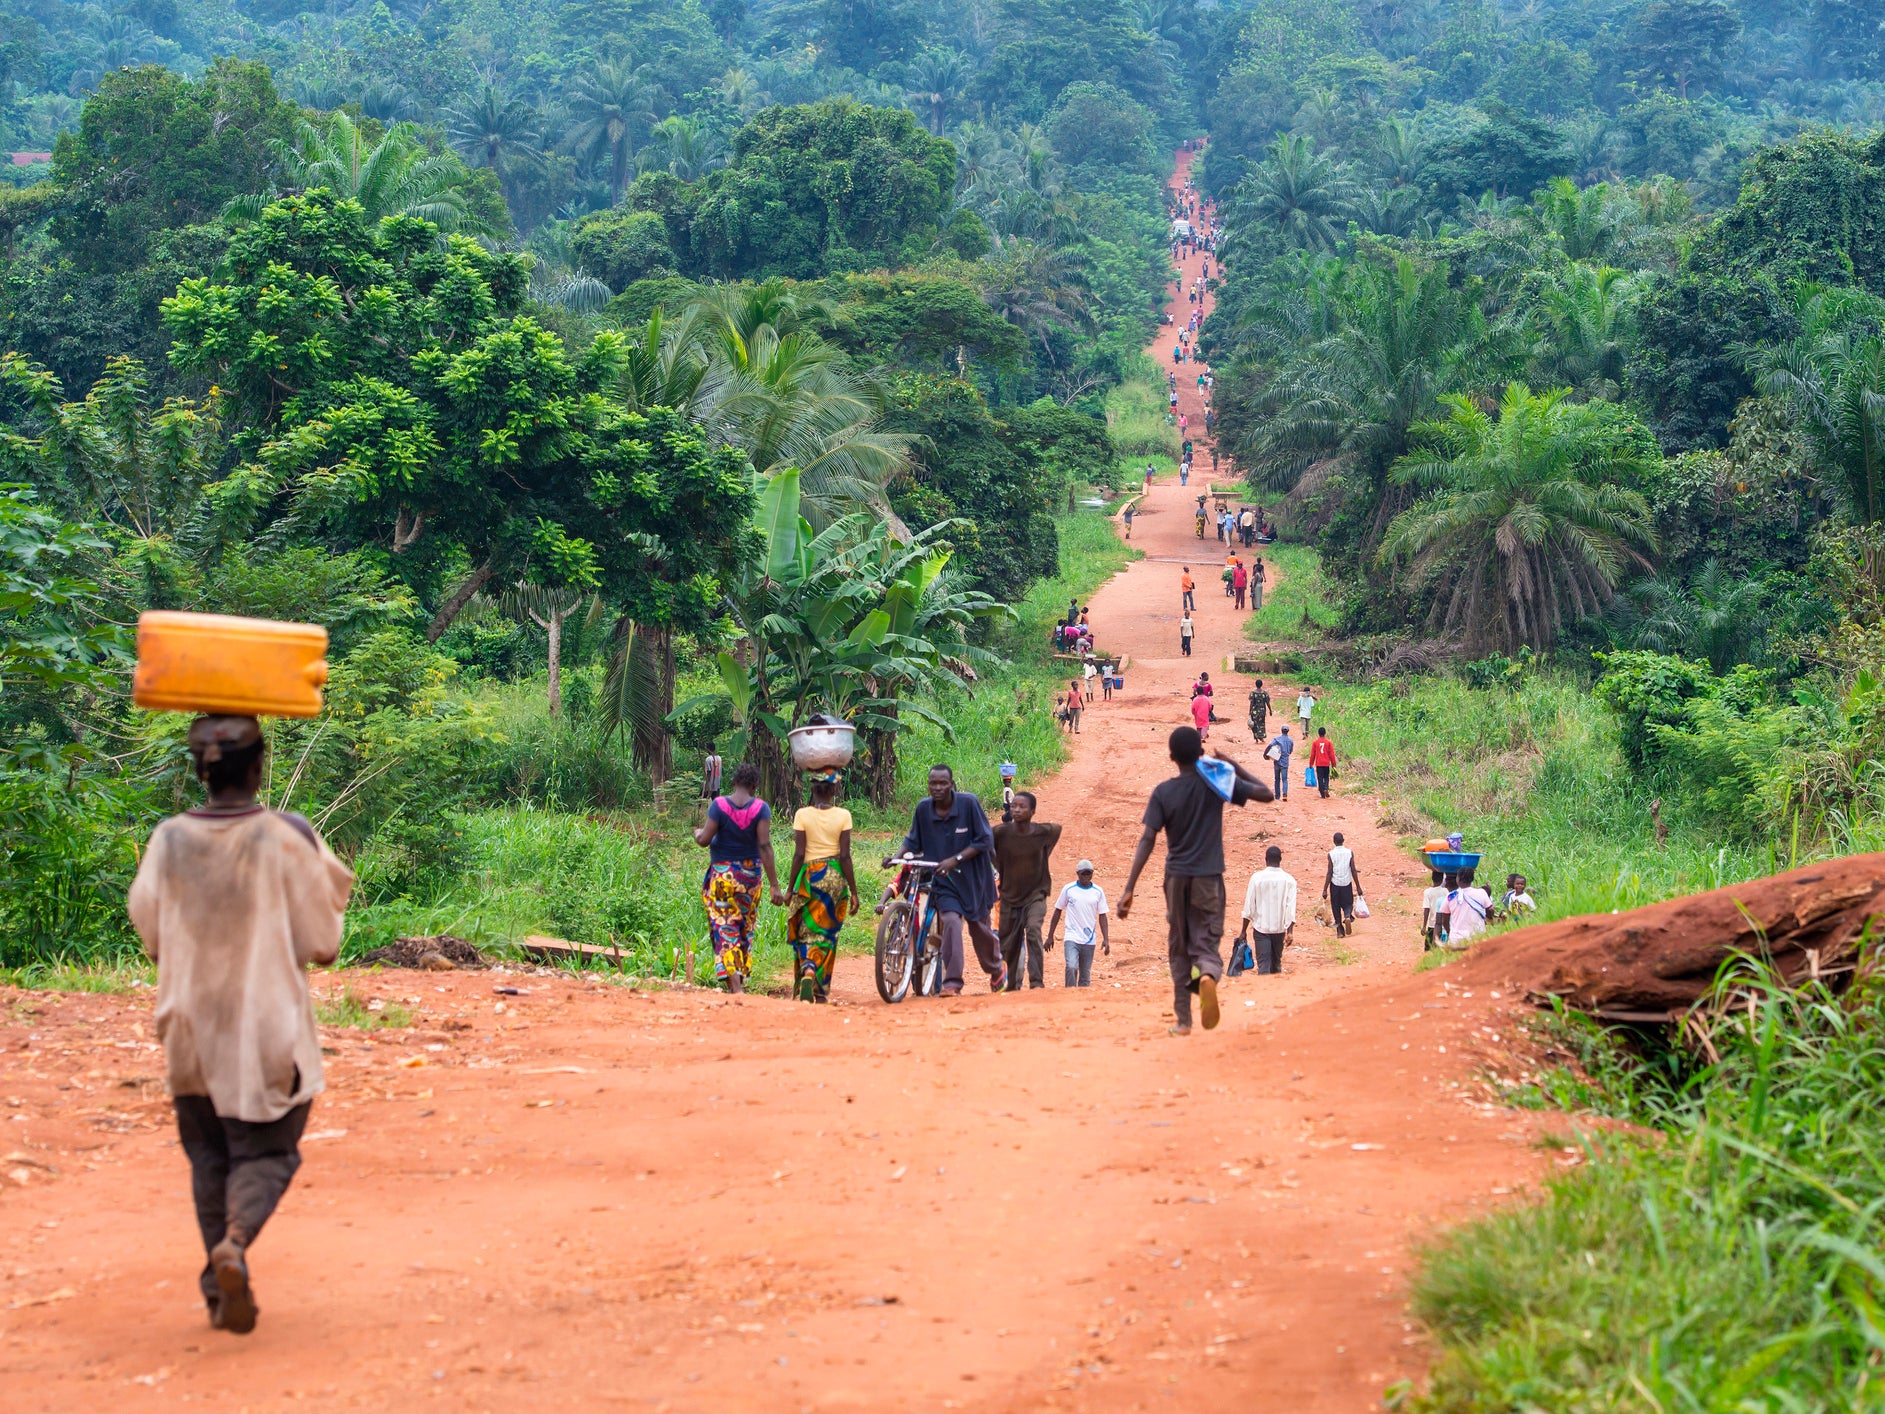 An unpaved road in the Democratic Republic of the Congo - one of the countries where biodiversity is threatened